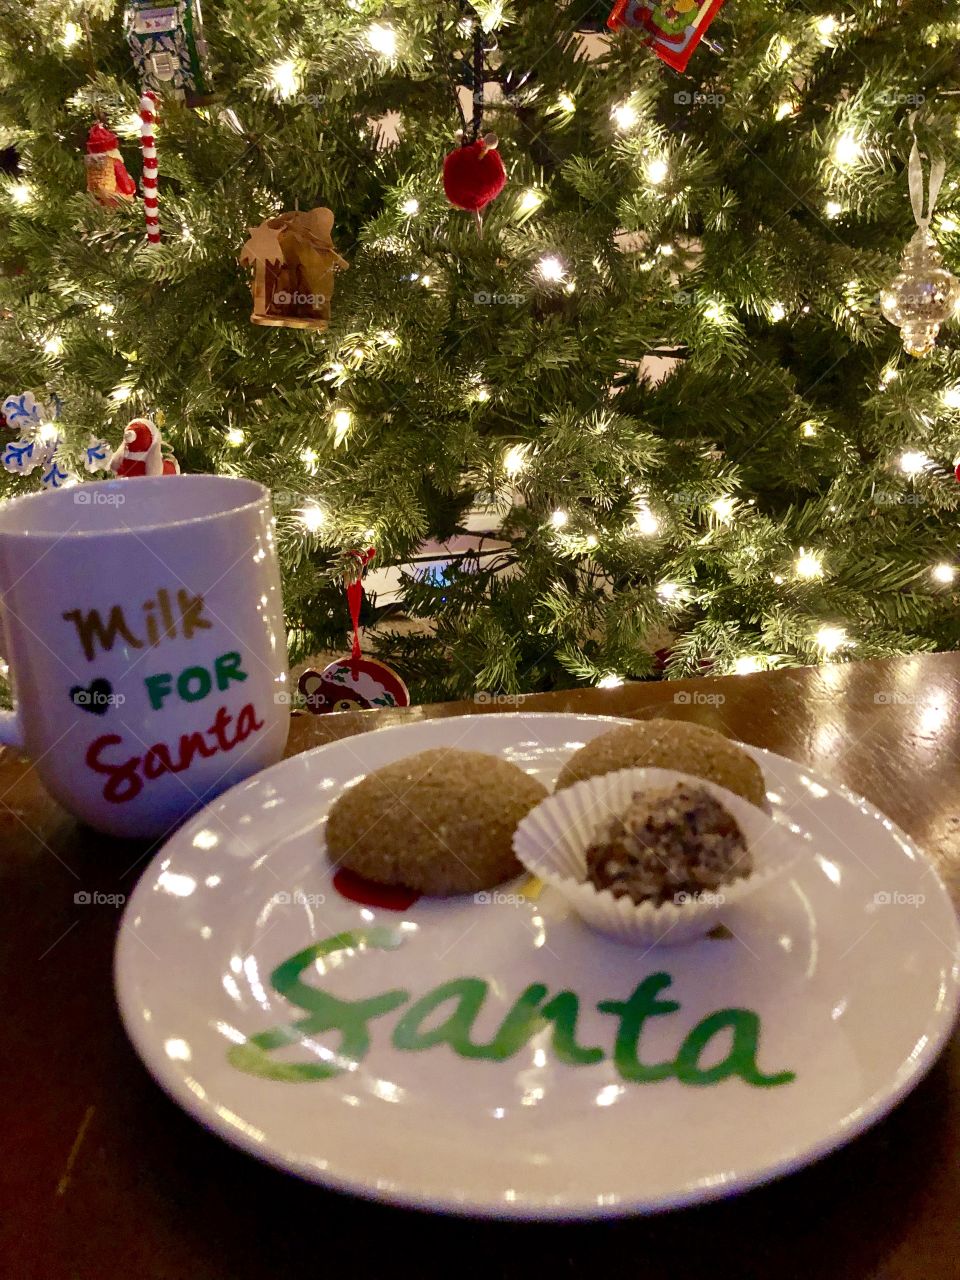 Cookies and milk waiting on Santa’s arrival!